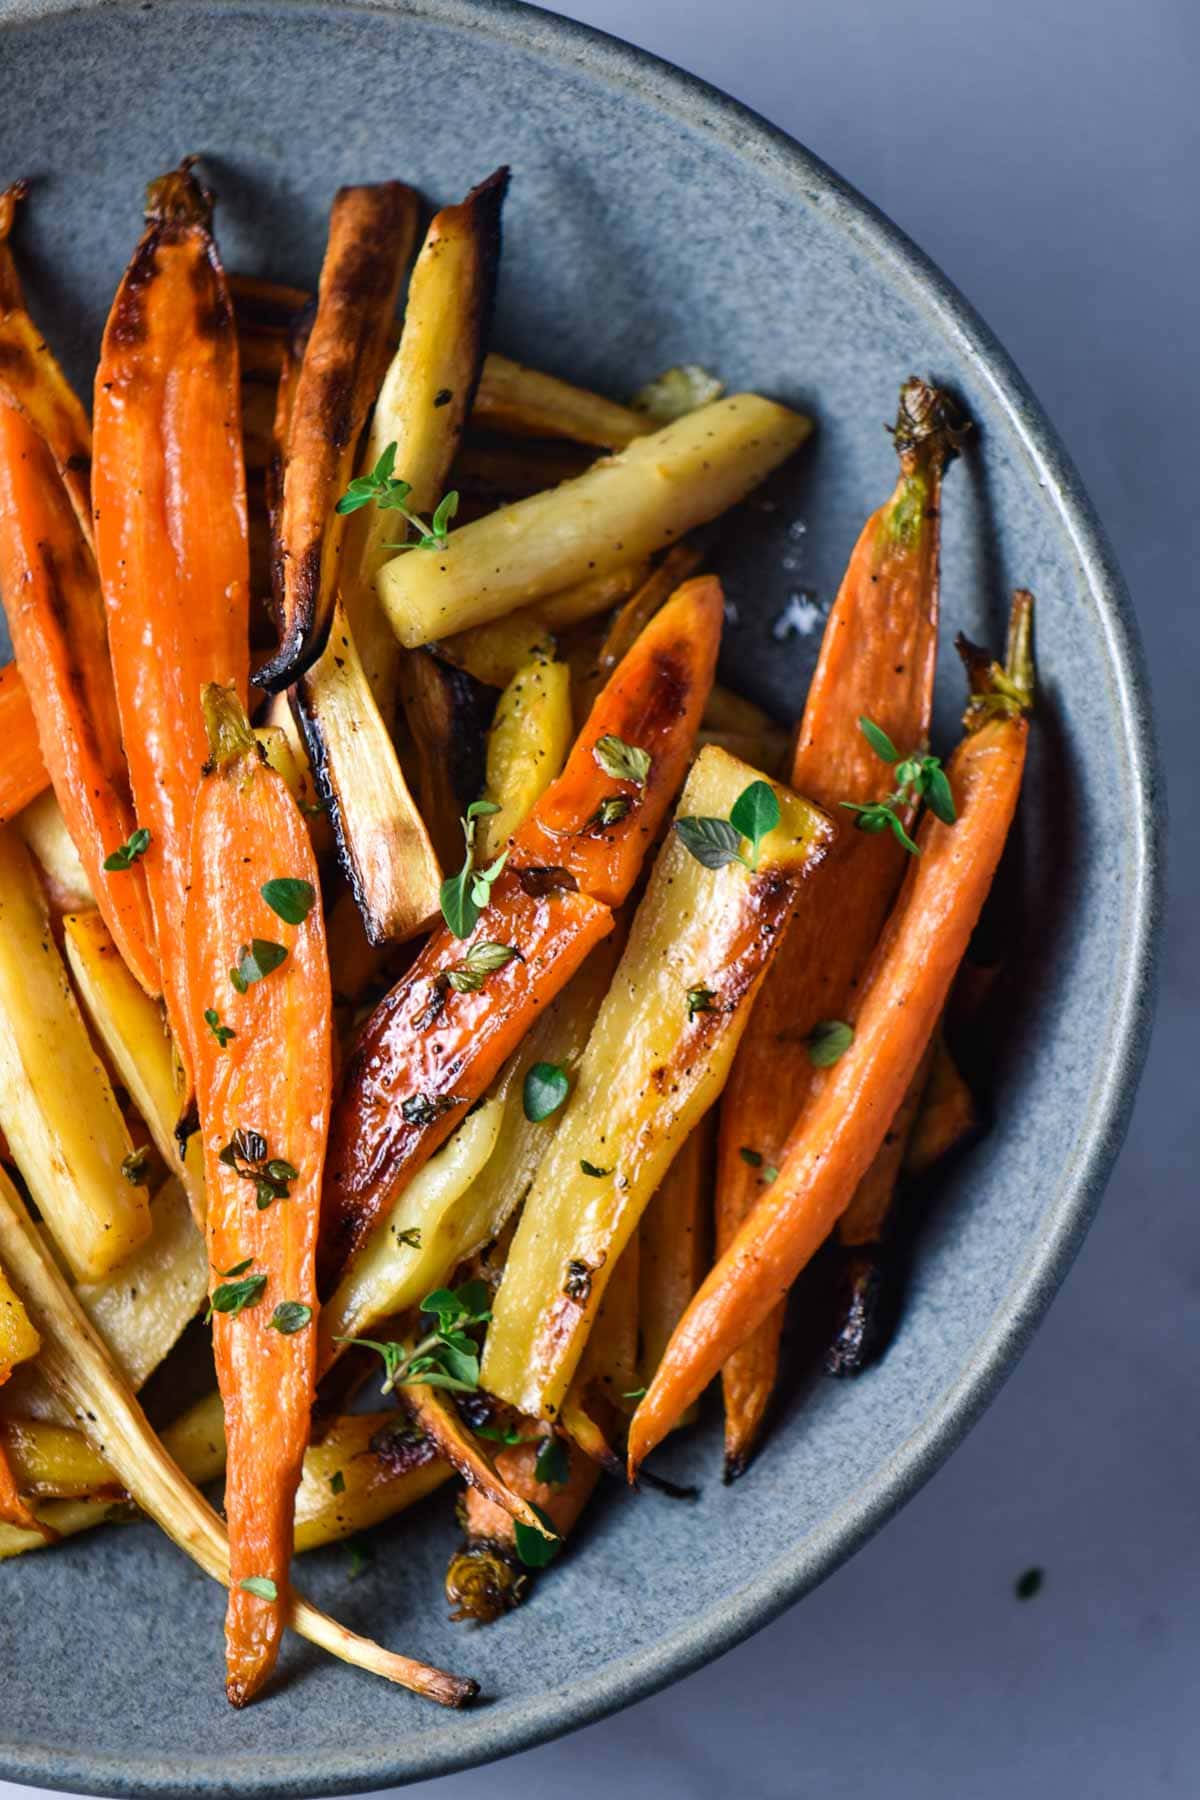 A bowl of carrots and parsnips.